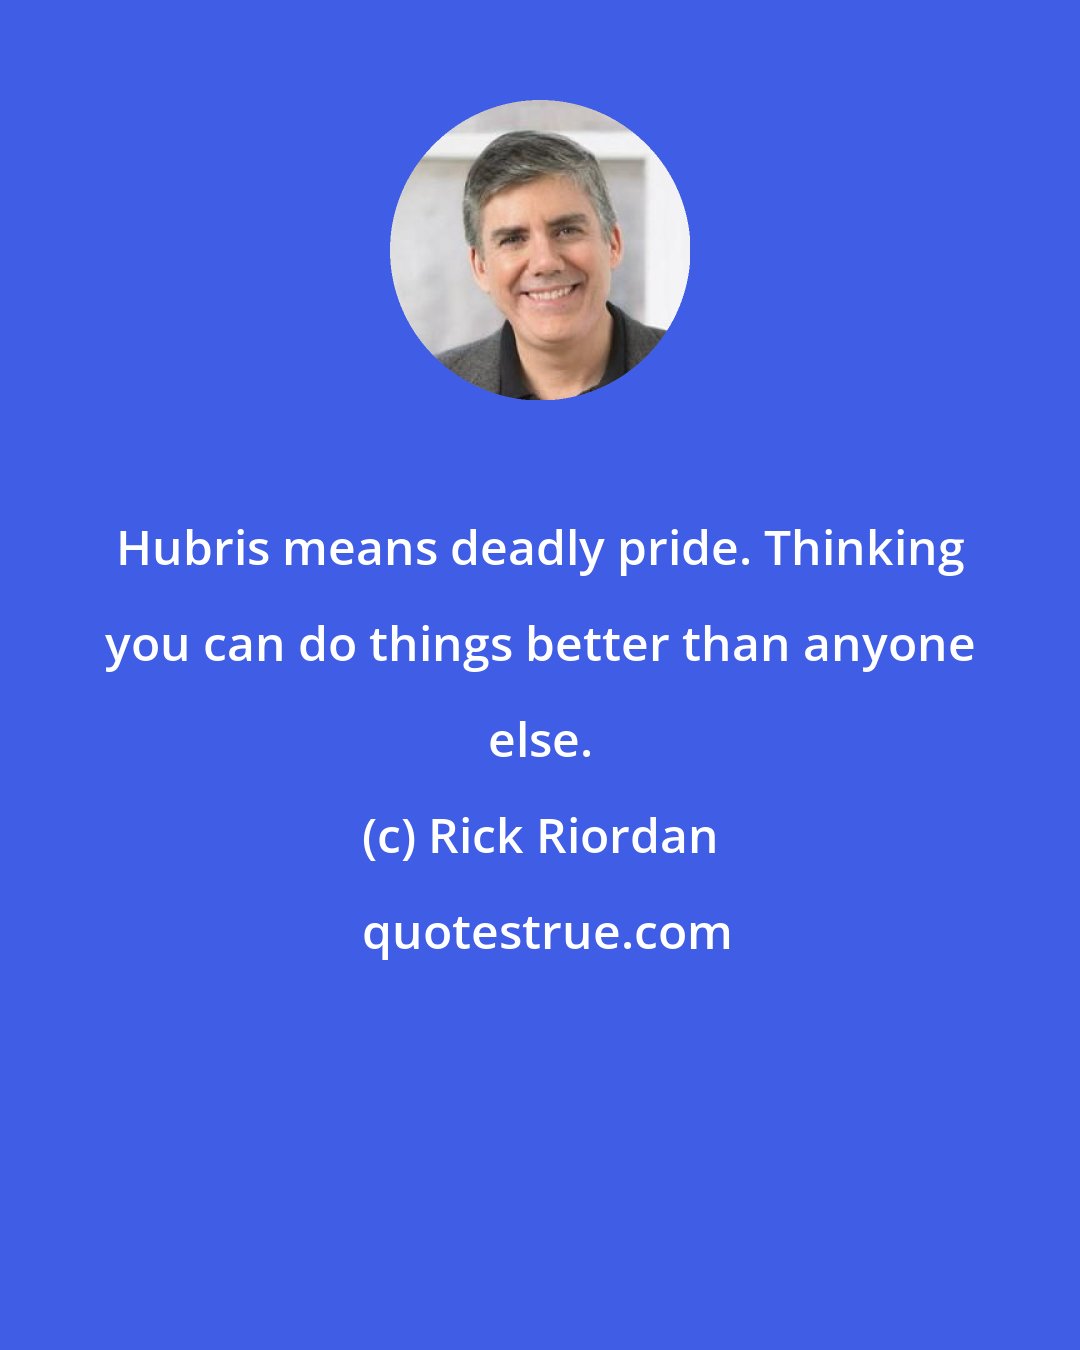 Rick Riordan: Hubris means deadly pride. Thinking you can do things better than anyone else.